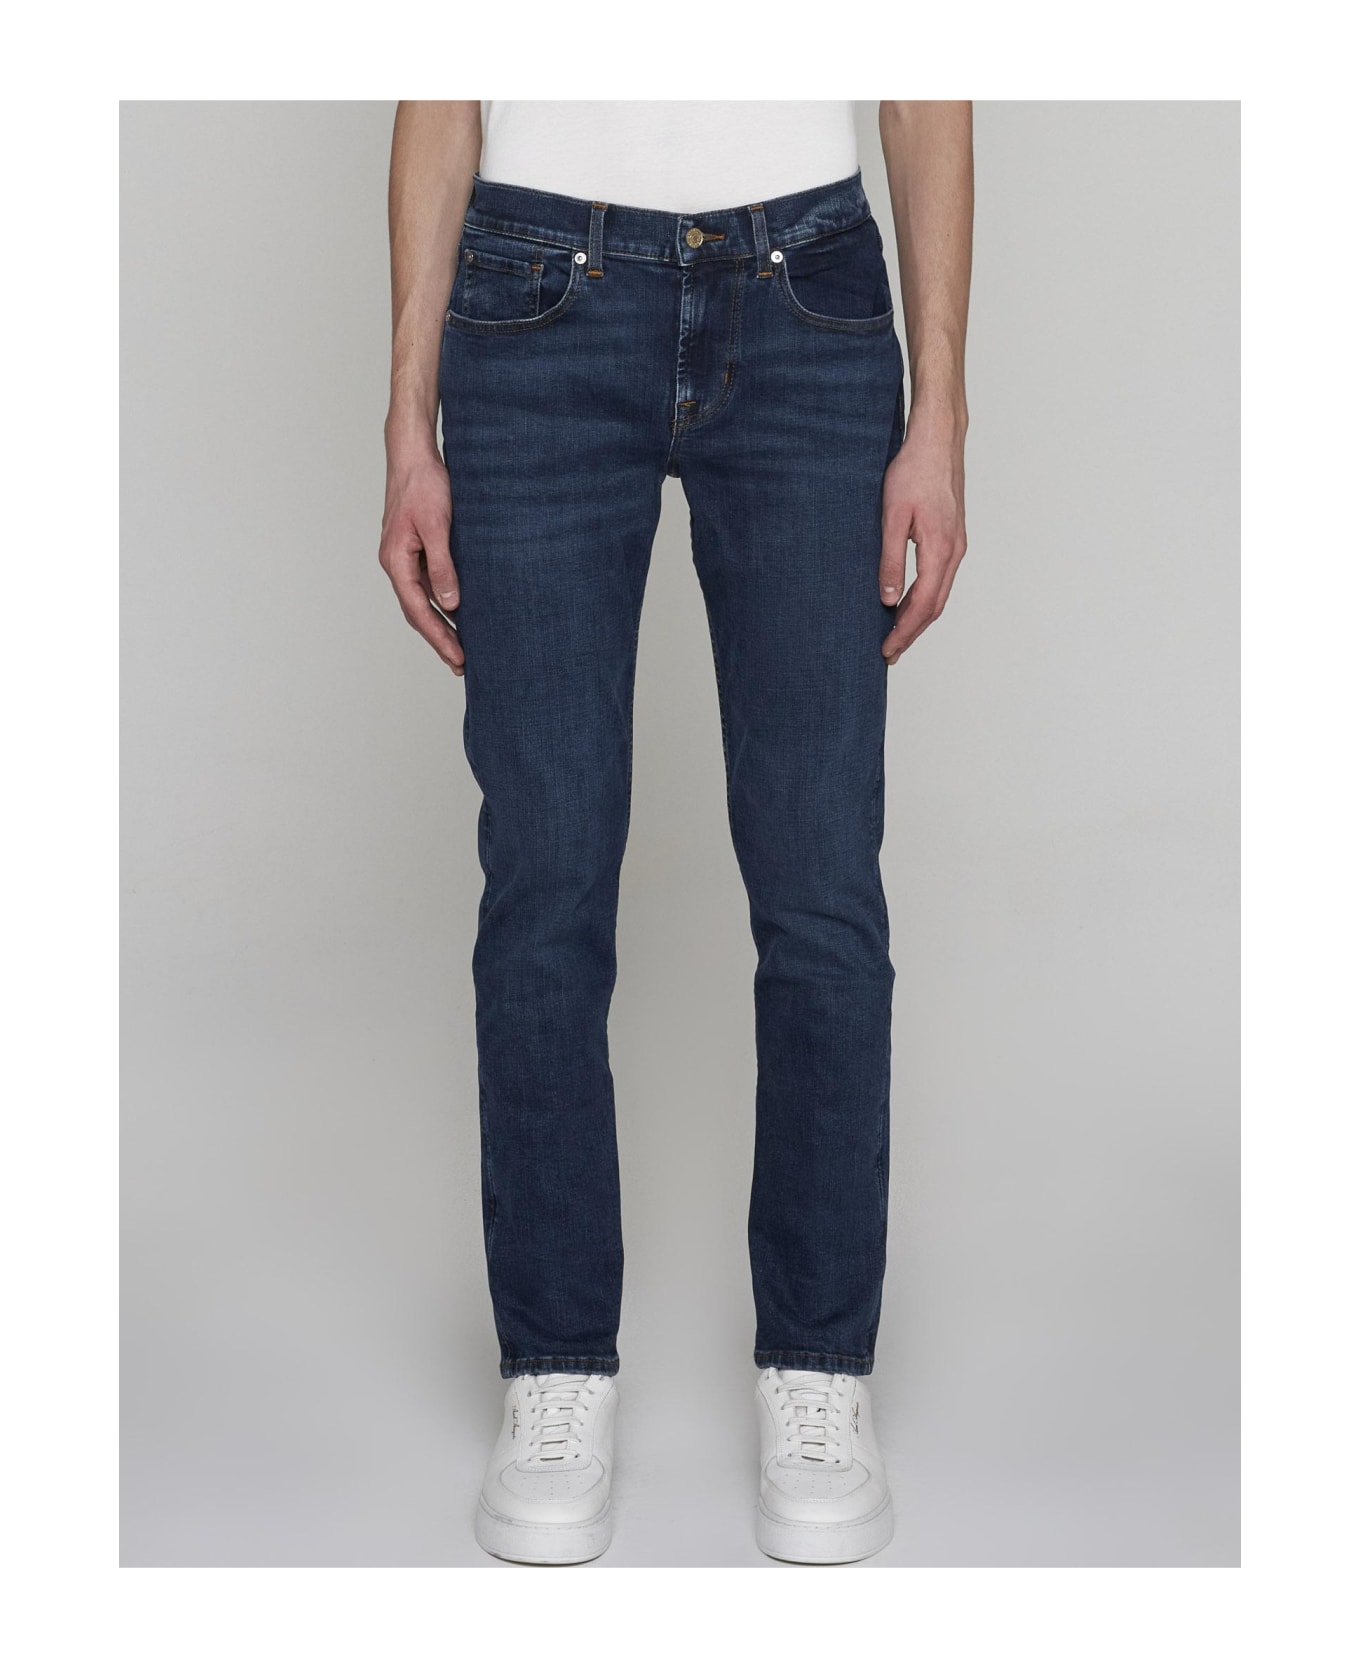 7 For All Mankind Slimmy Tapered Jeans - DENIM BLUE